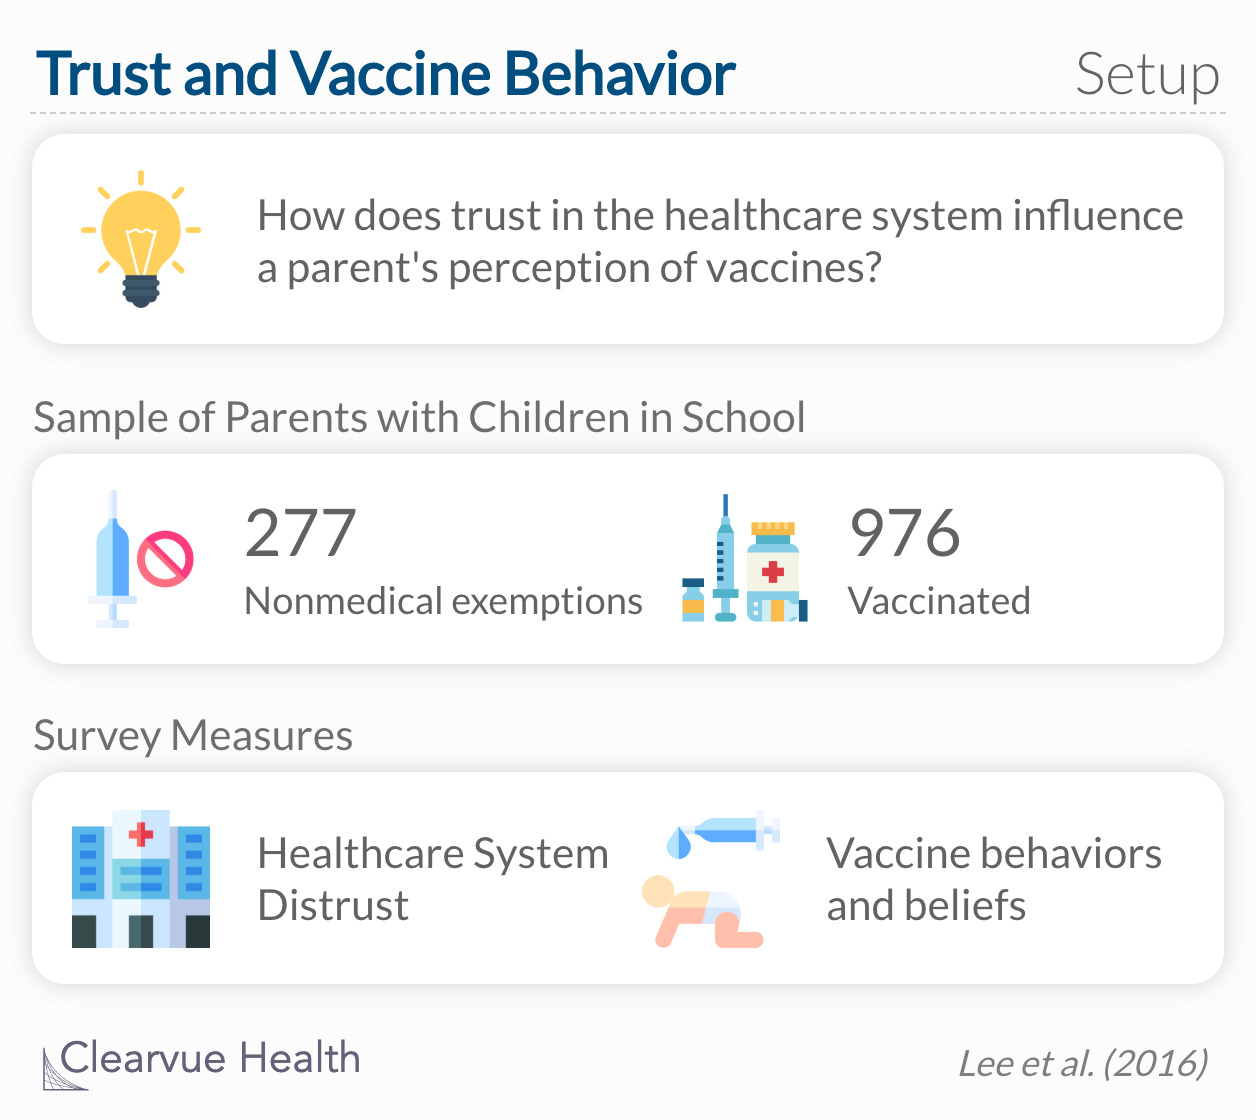 How does trust in the healthcare system influence parental likelihood of vaccinating themselves and their children? 